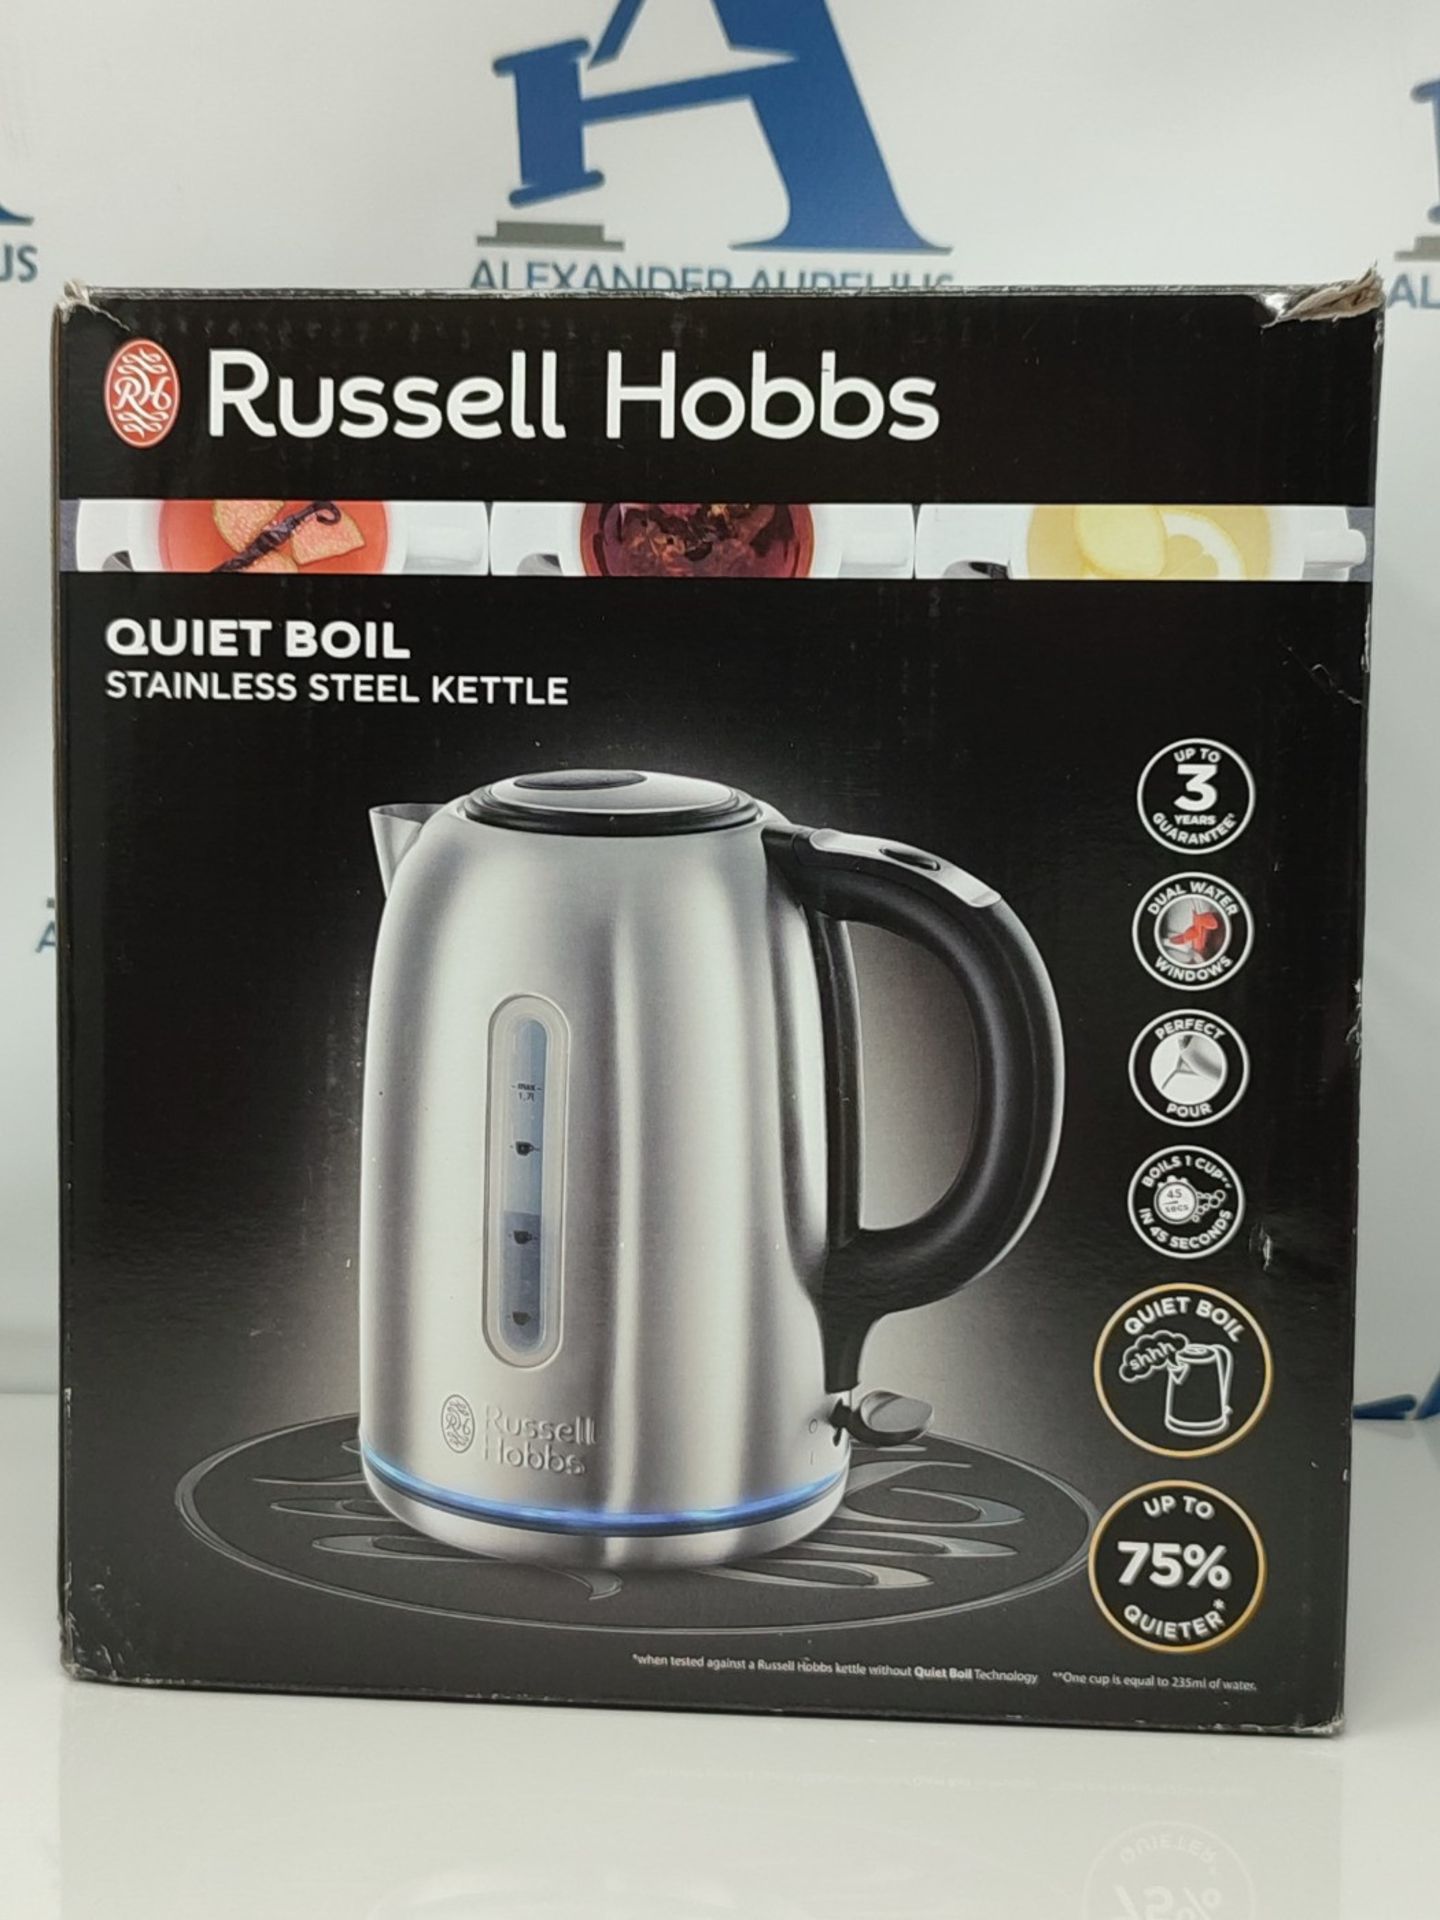 Russell Hobbs 20460 Quiet Boil Kettle, Brushed Stainless Steel, 3000W, 1.7 Litres - Bild 2 aus 3